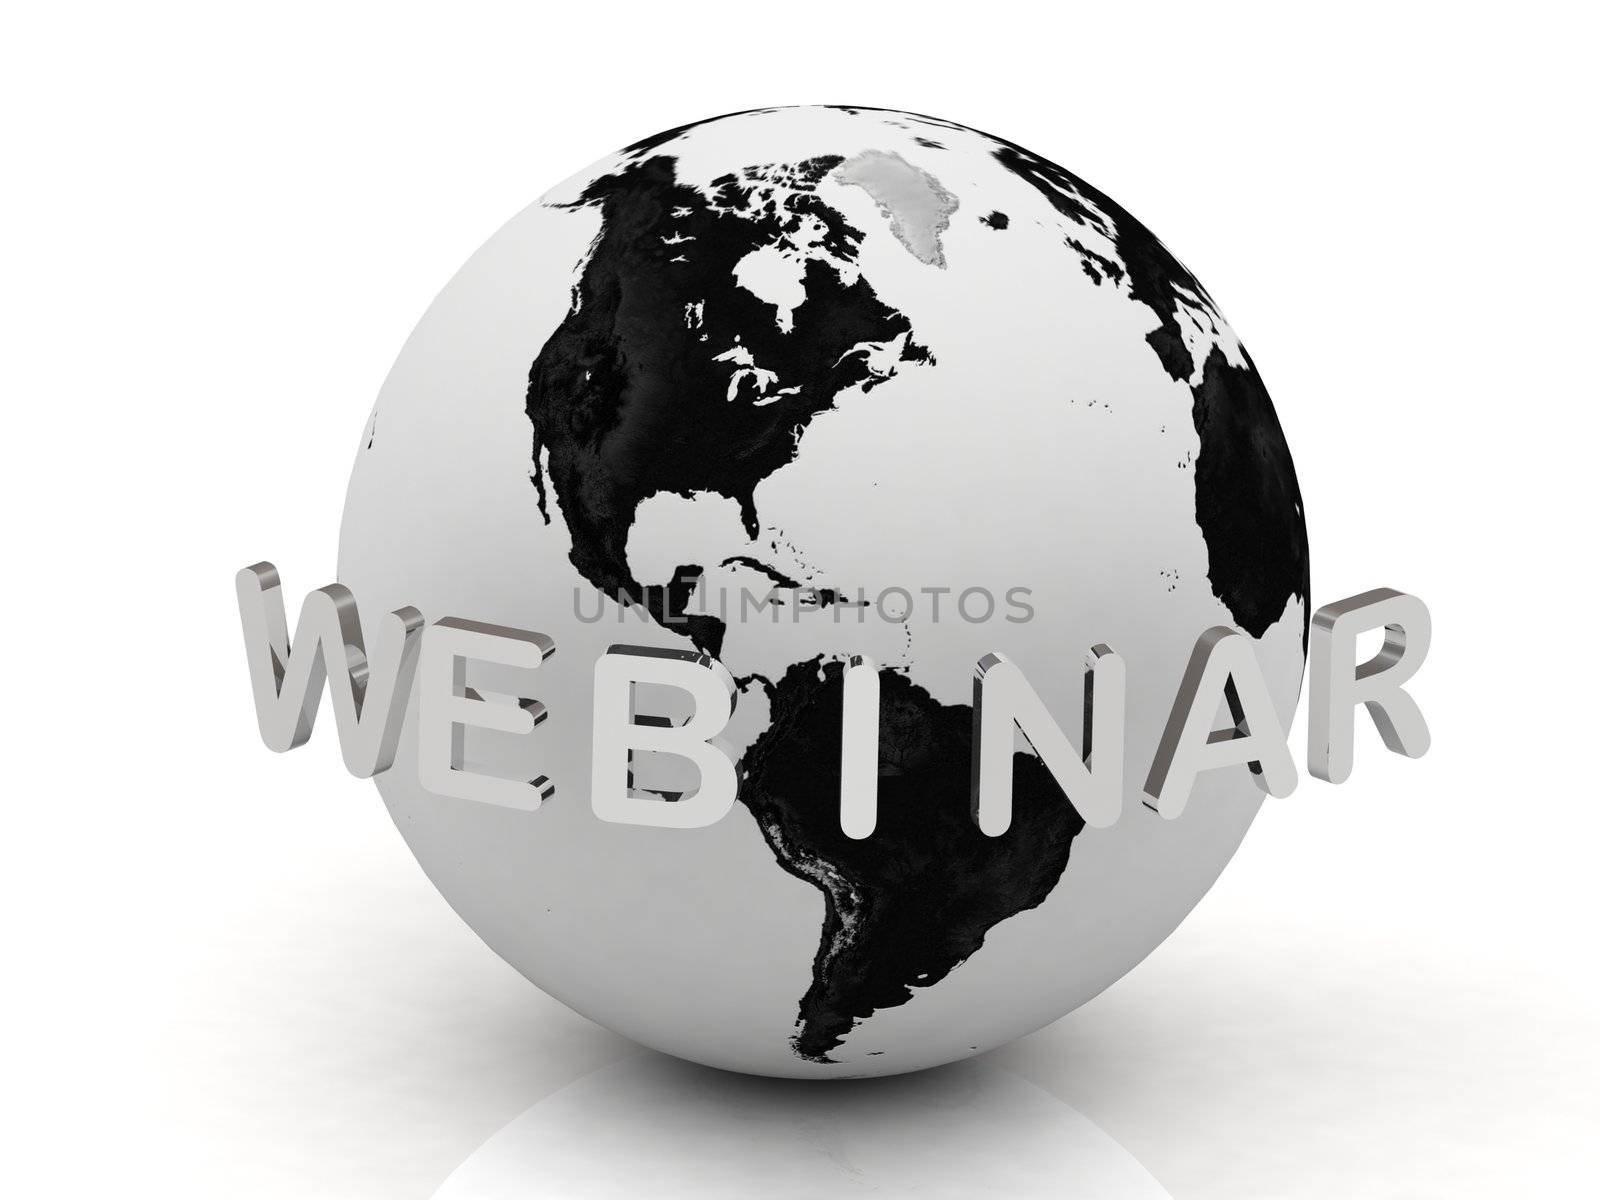 Webinar, abstraction of the inscription around the earth on a white background